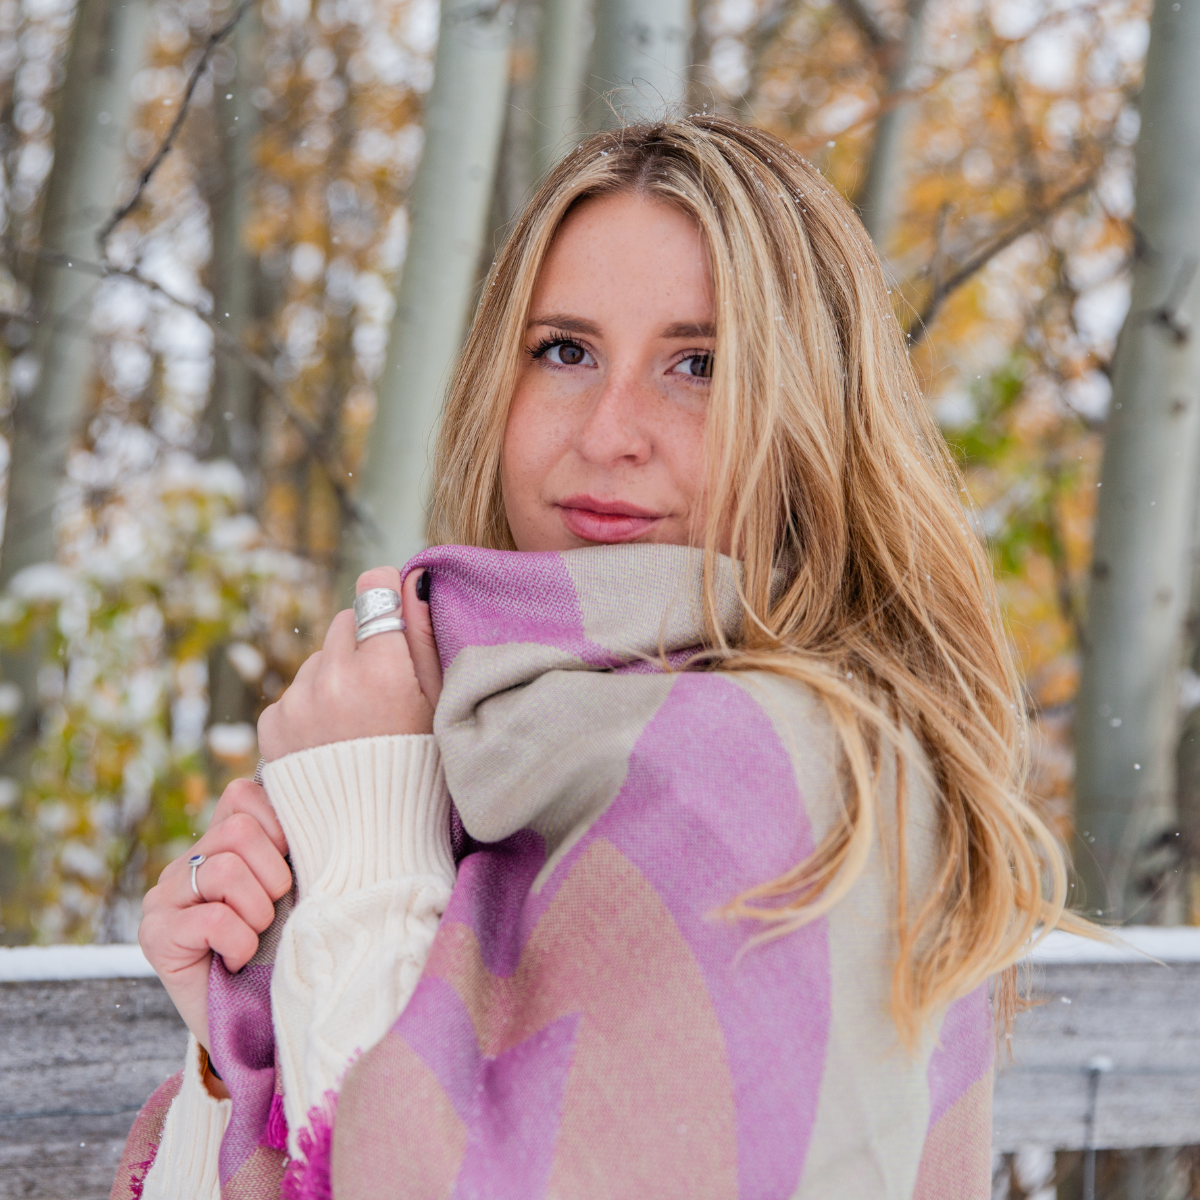 A blonde woman stands in front of a fence and aspen trees with the alpaca and silk soft cozy fashionable pink, green, and orange square shawl wrapped around her shoulders.